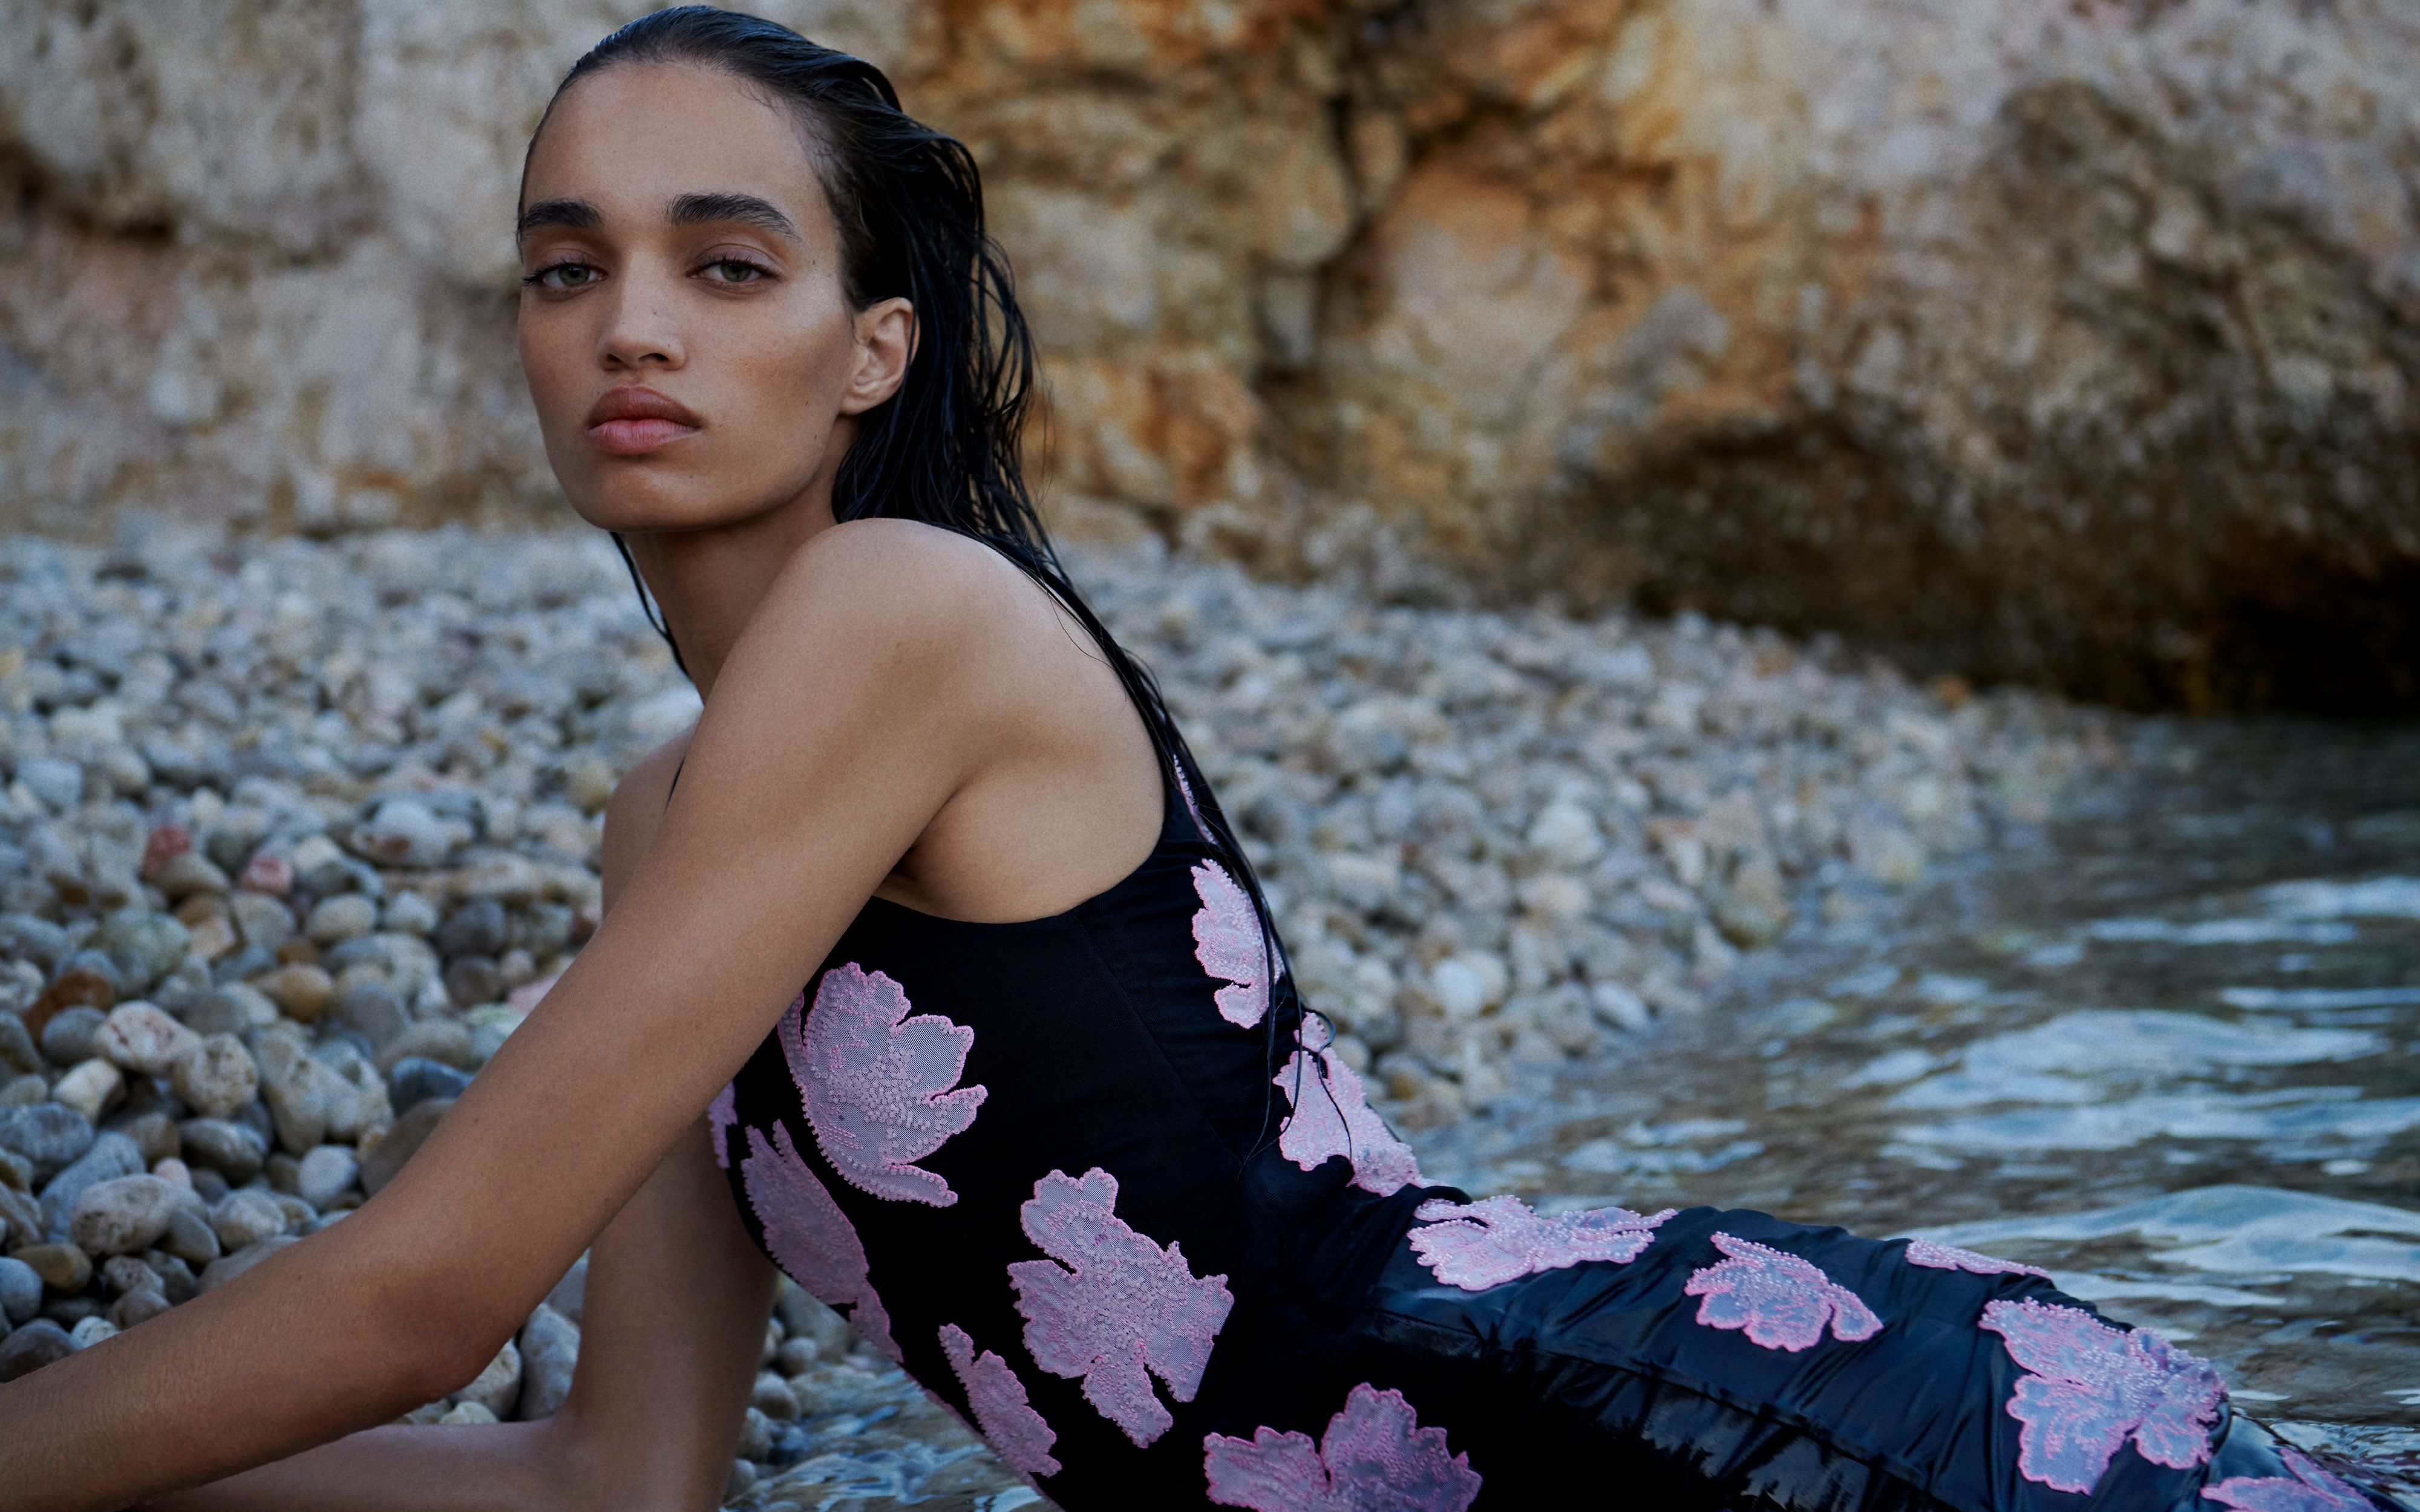 Model reclined on the beach wearing a black dress with embroidered pink flowers